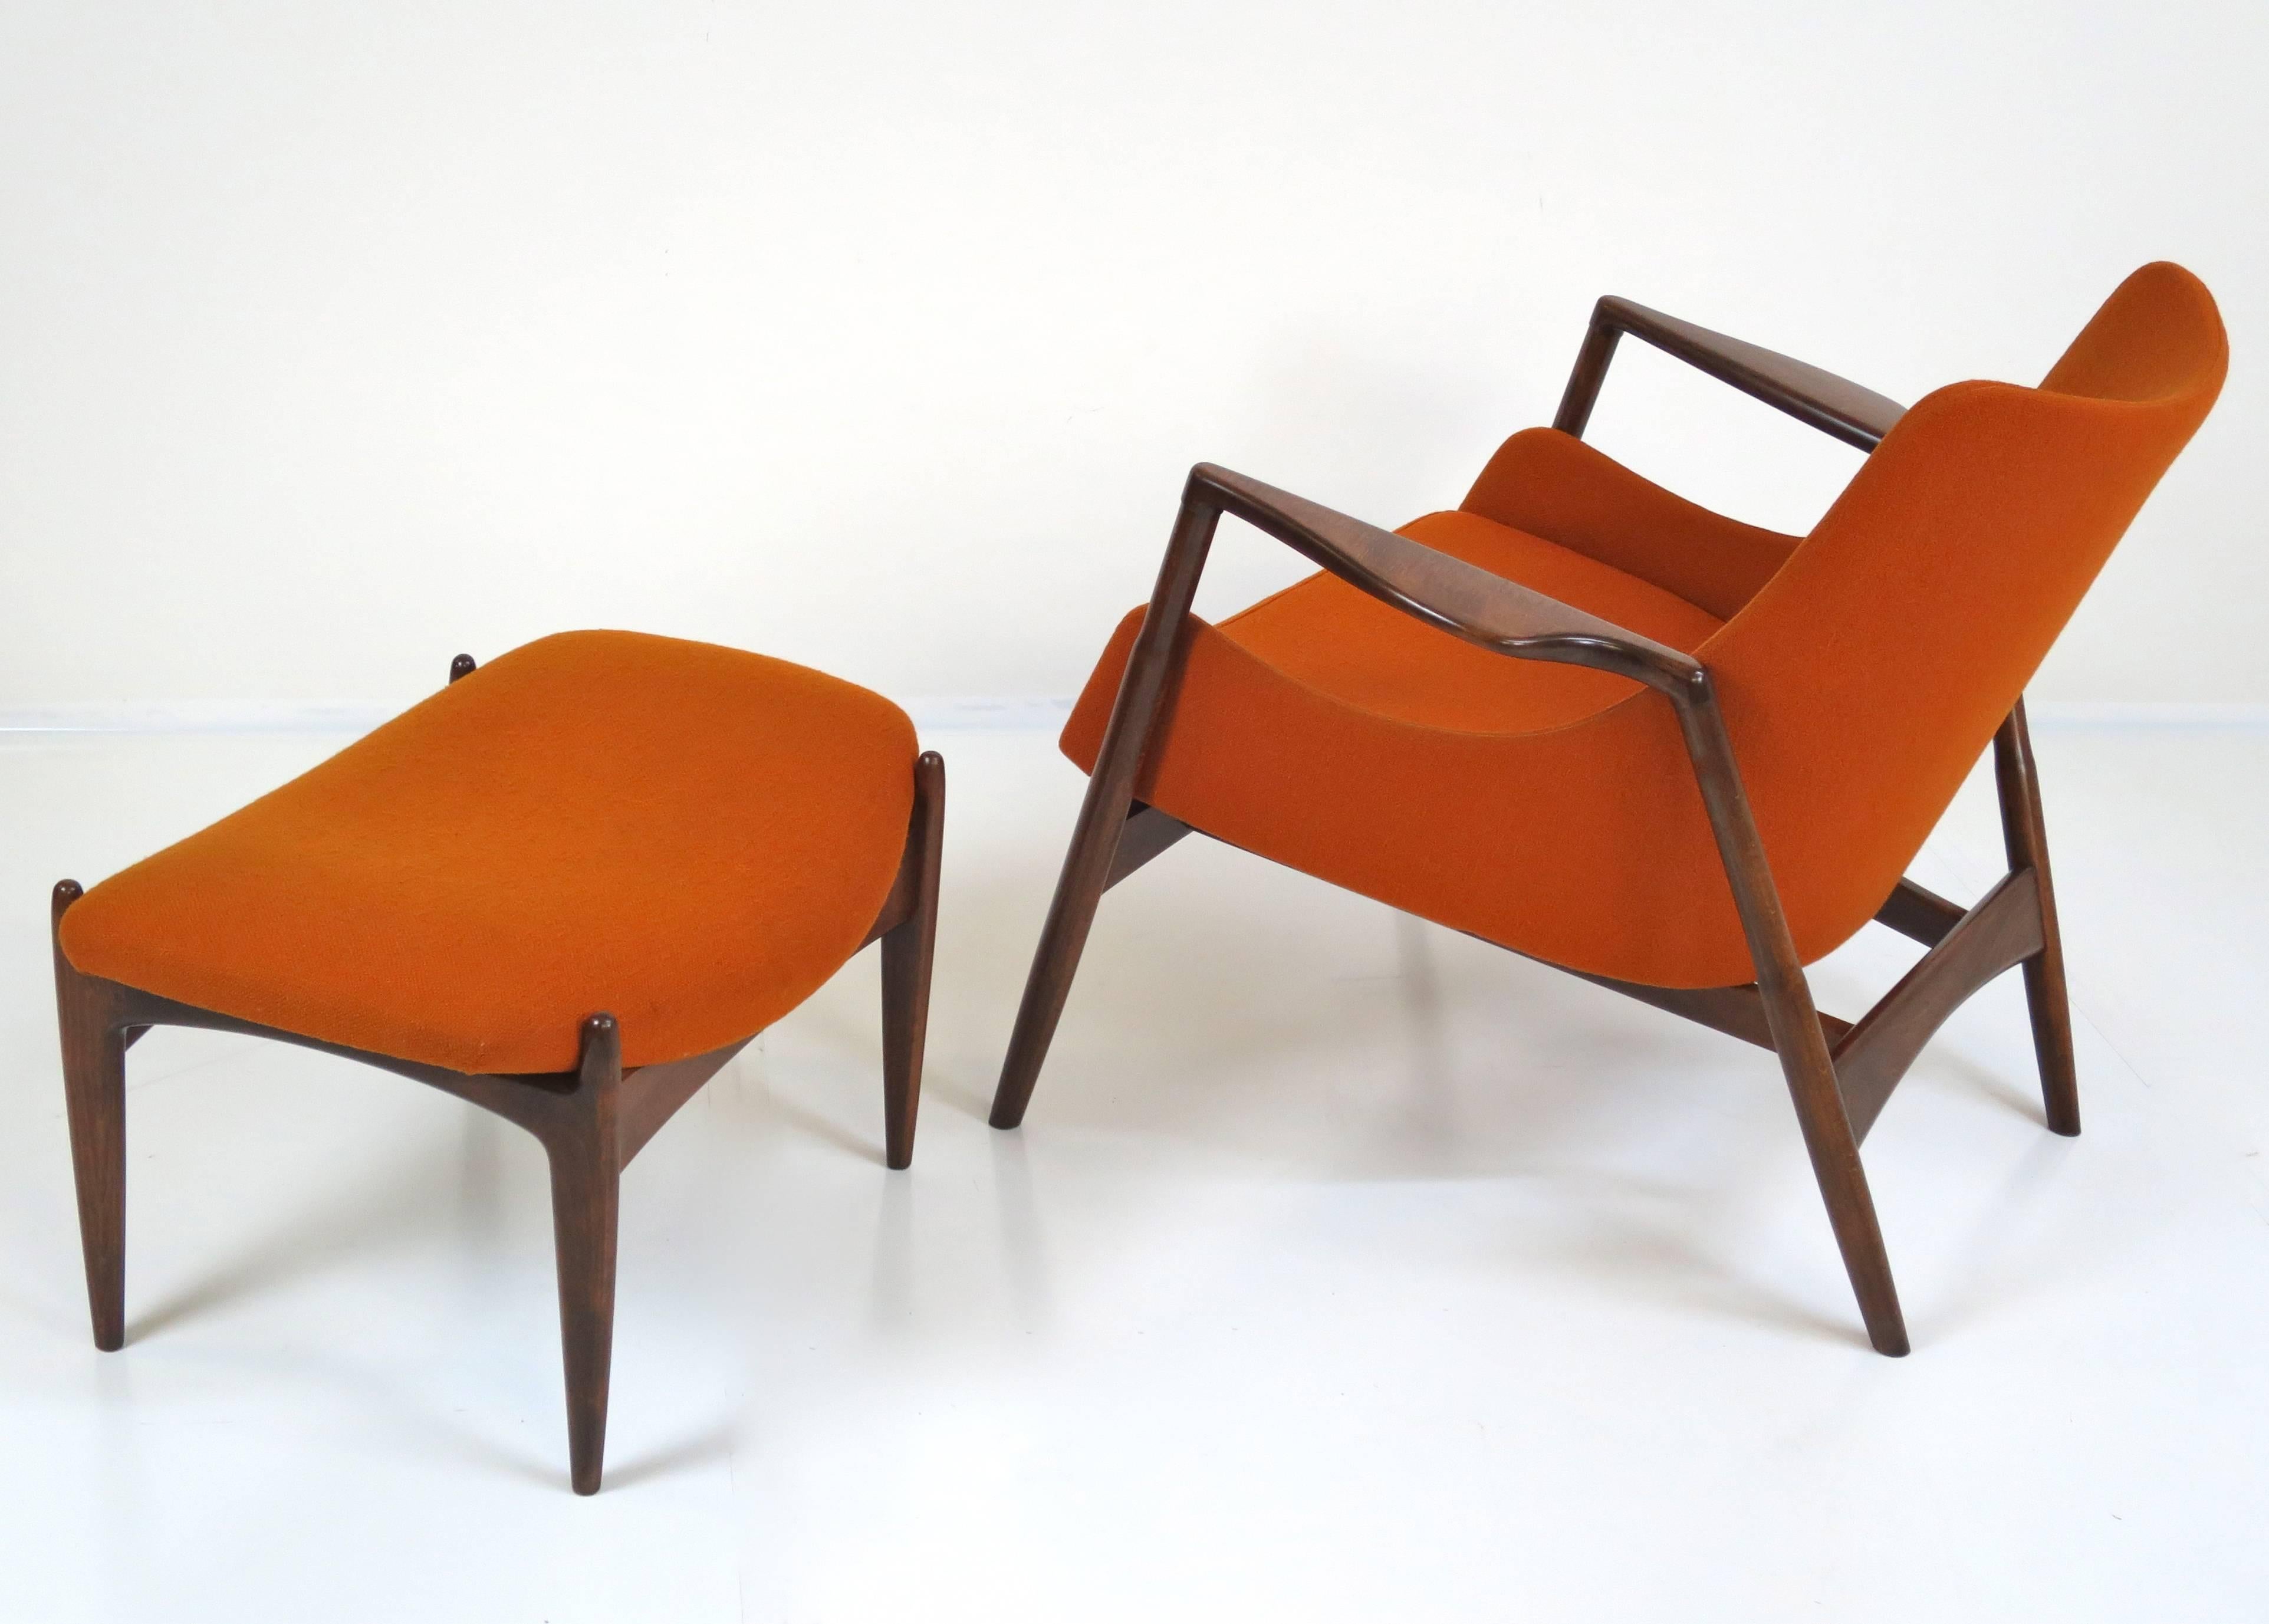 Rare Ib Kofod-Larsen lounge chair and ottoman. Solid wood frame has been refinished. The bright orange fabric is original. Imported by Selig.
Measures: Chair 32